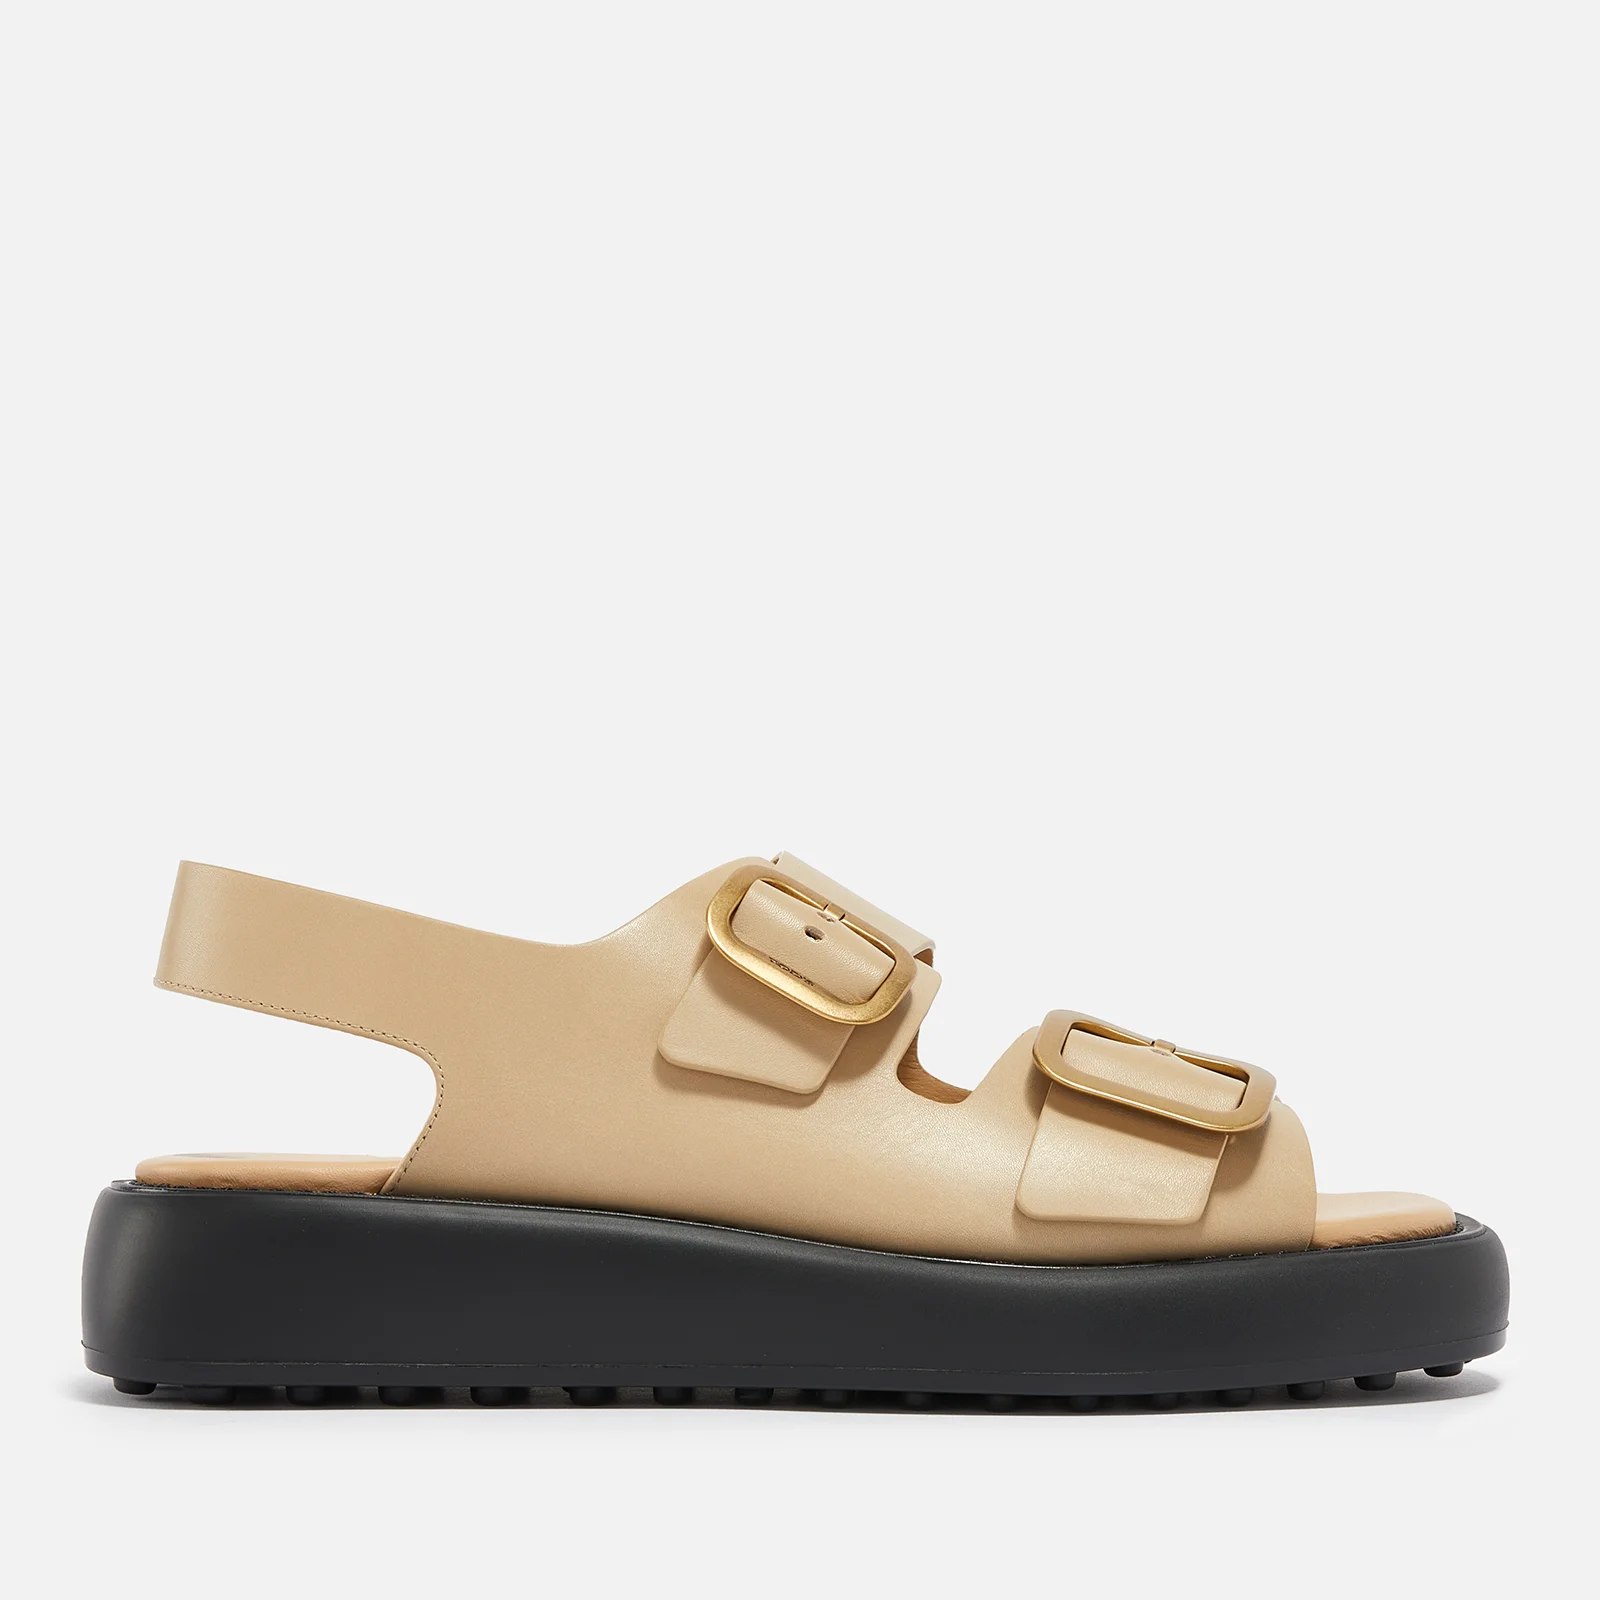 Tod's Women's Leather Sandals Image 1